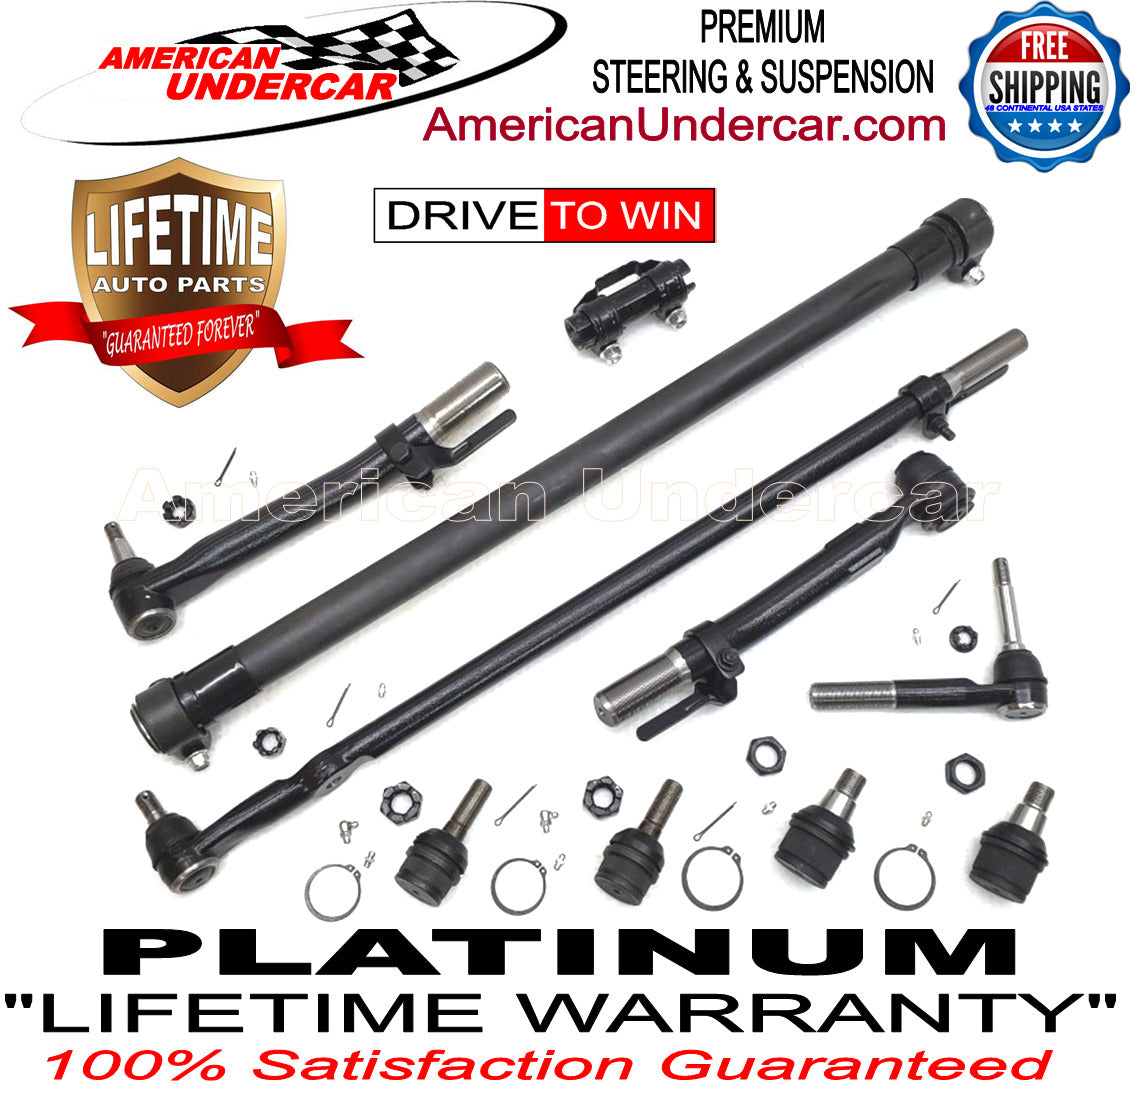 Lifetime Ball Joint Steering Suspension Kit for 2011-2016 Ford F350 Super Duty 4x4